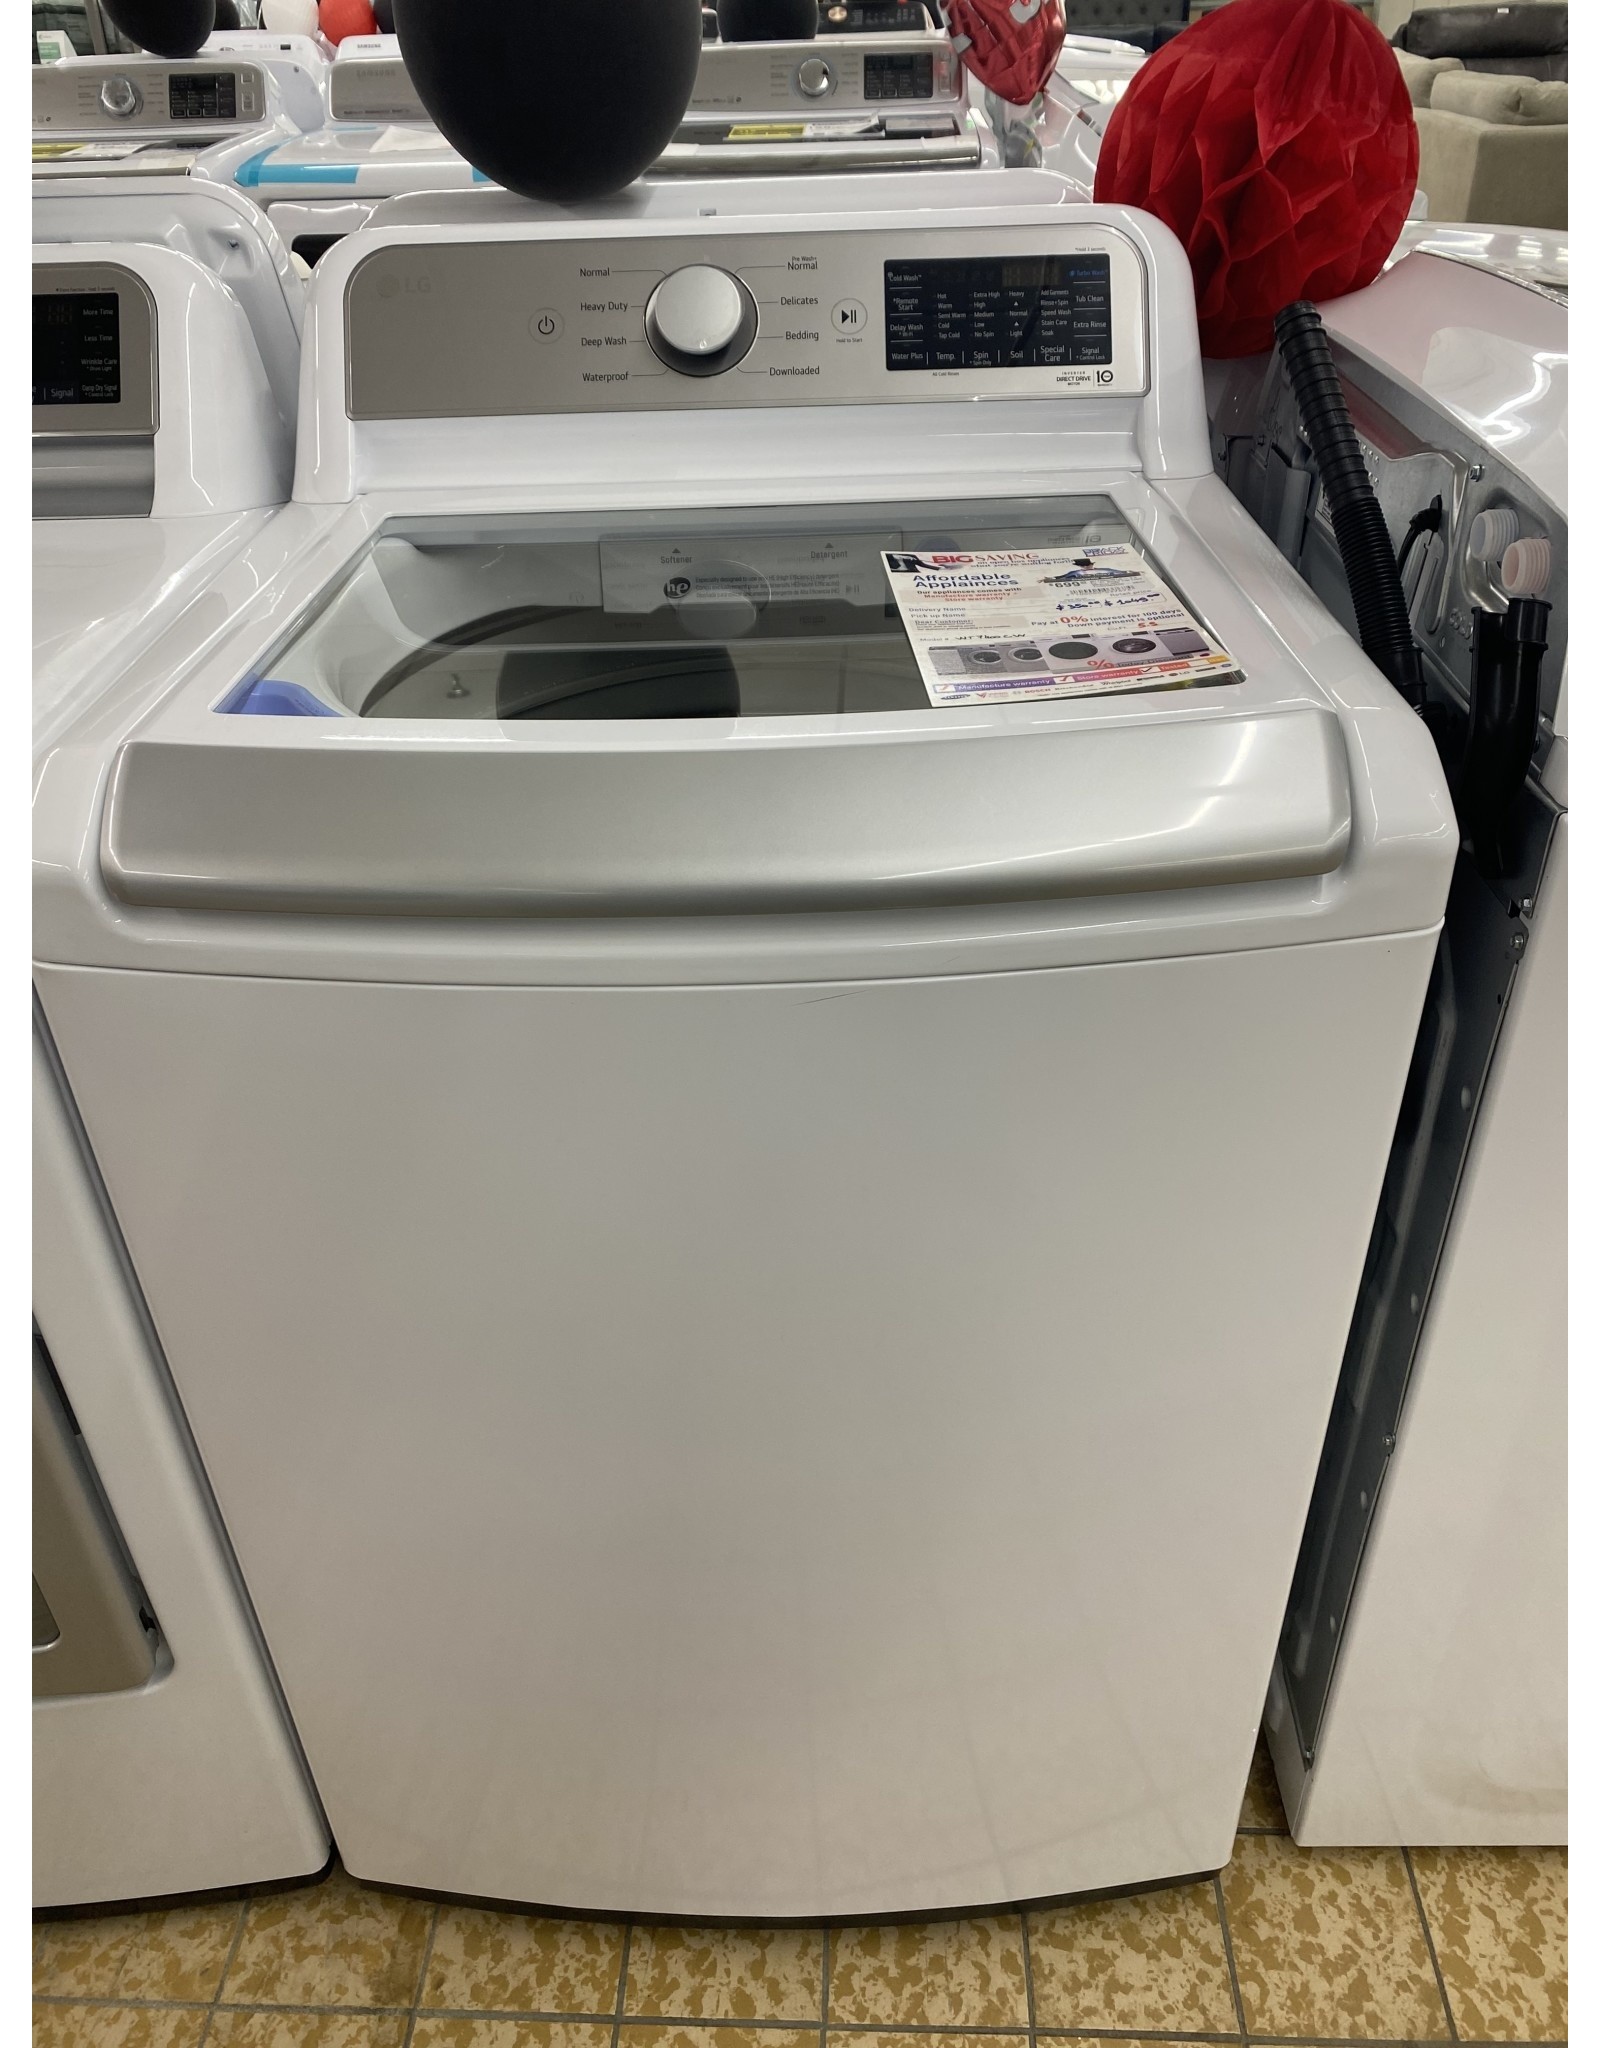 LG Electronics WT7400CW LG - 5.5 Cu. Ft. Smart Top Load Washer with TurboWash3D - White